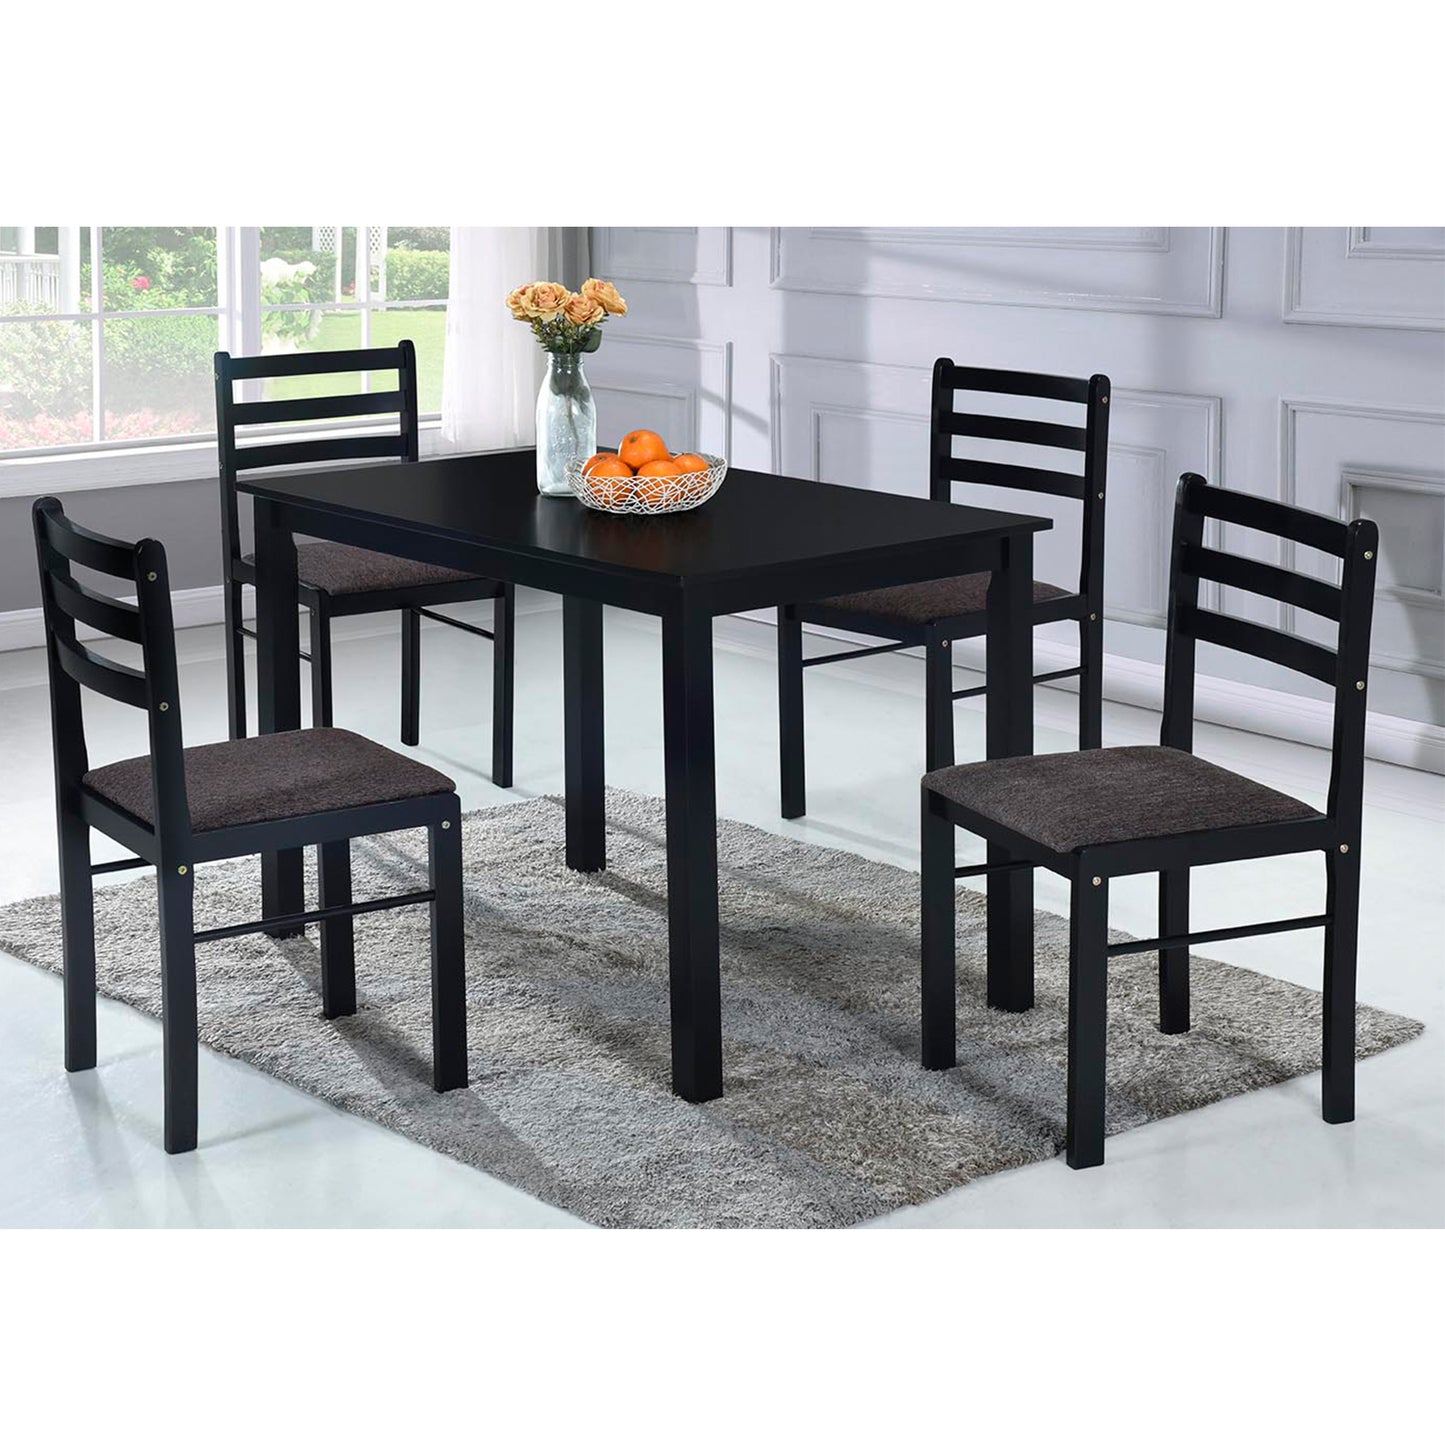 Bowzar Imported Wooden 4 Seater Dining Table Set Brown